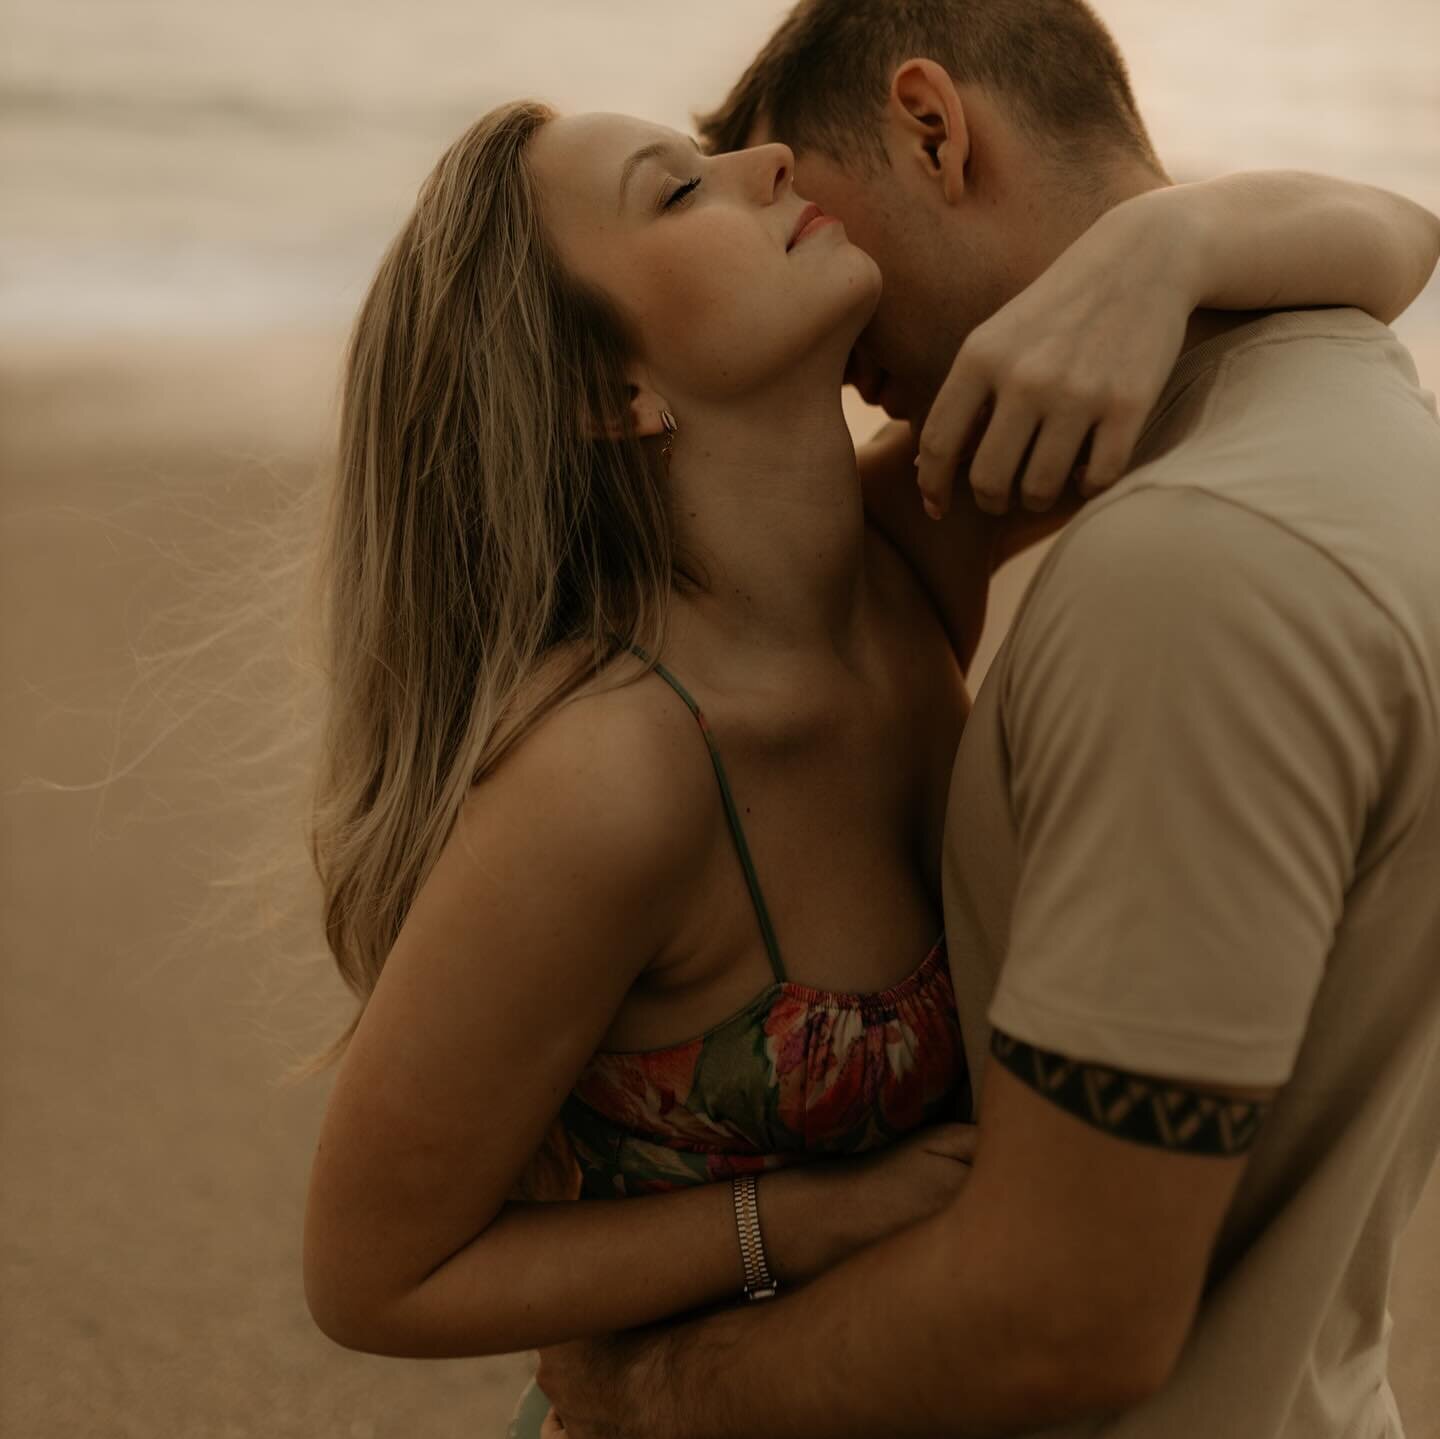 Home is with you 🤍

Capturing love is my favorite thing🐚

#melbournefloridaphotographer #melbourne #melbourneflphotographer #floridaphotographer #spacecoastliving